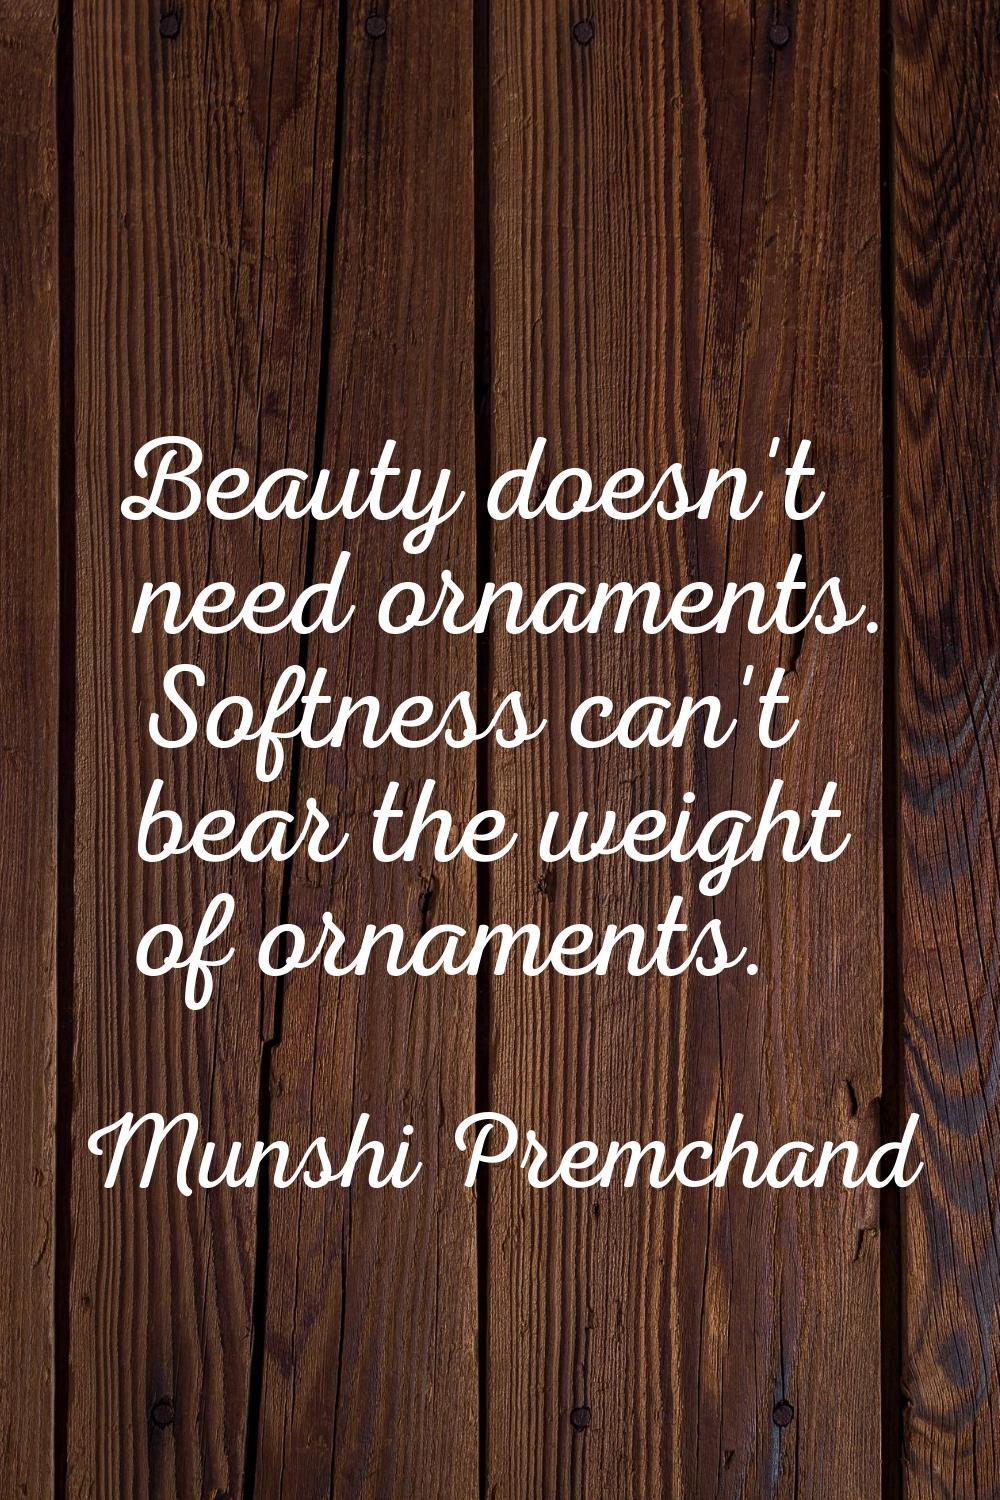 Beauty doesn't need ornaments. Softness can't bear the weight of ornaments.